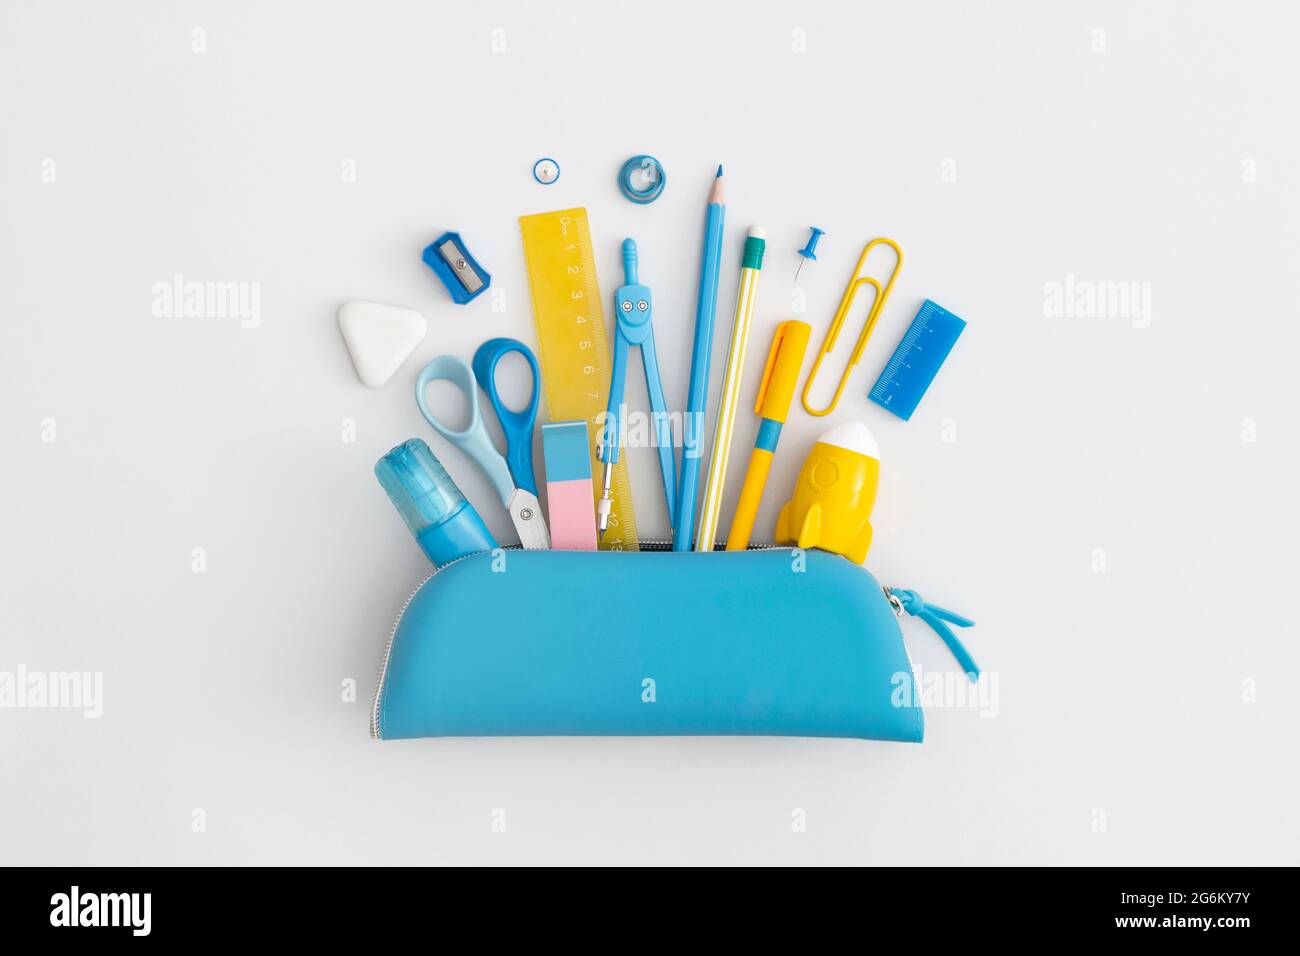 Pencil case with school stationery on a grey background. Top view. Flat lay. Back to school concept. Stock Photo